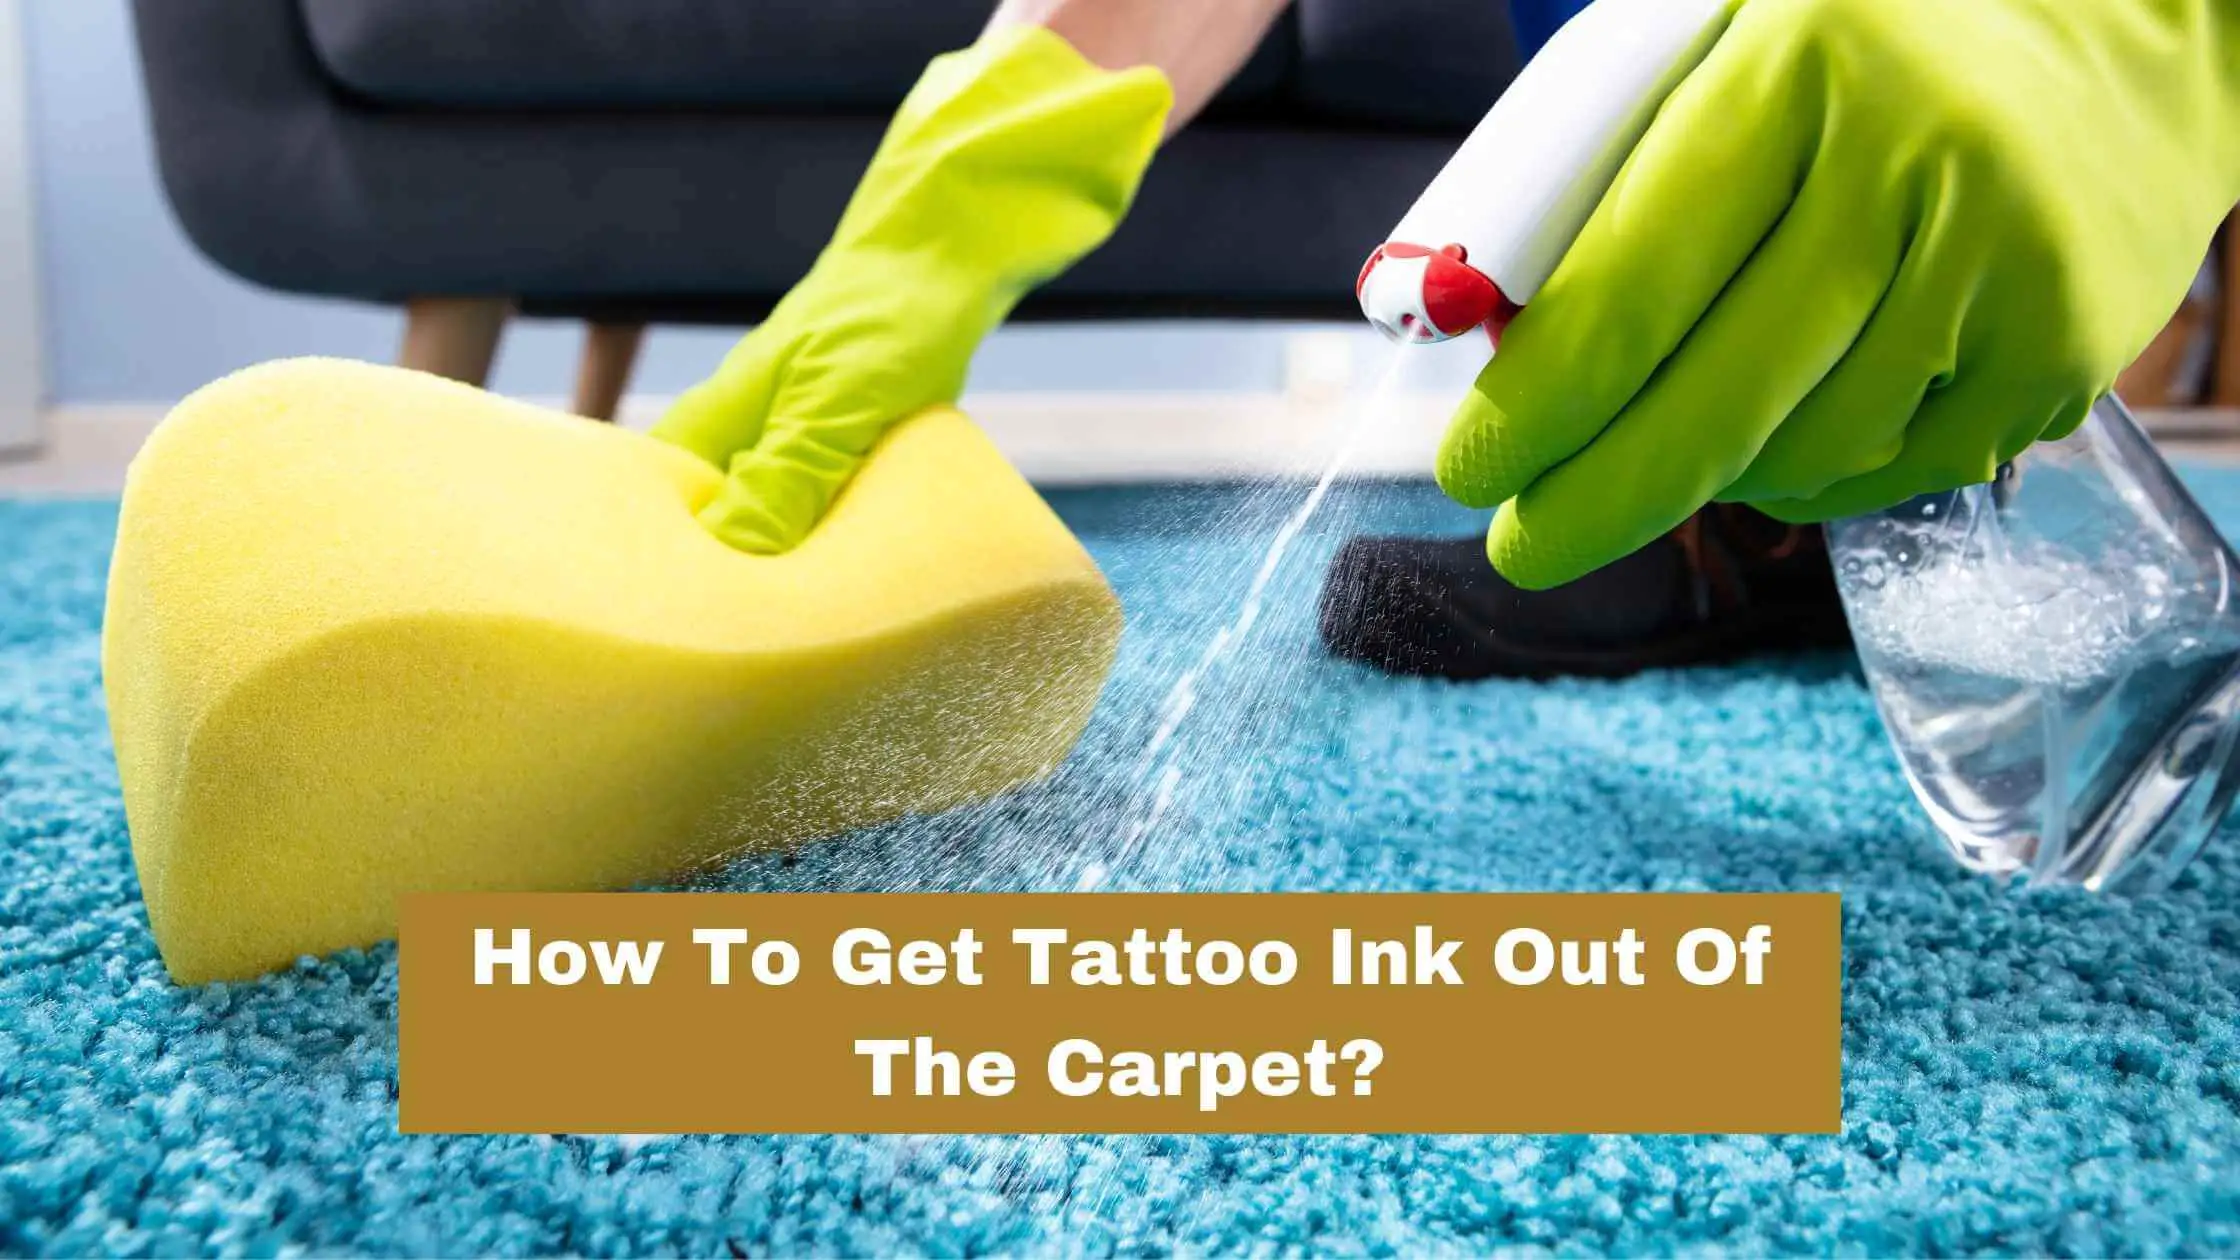 How To Get Tattoo Ink Out Of Carpet